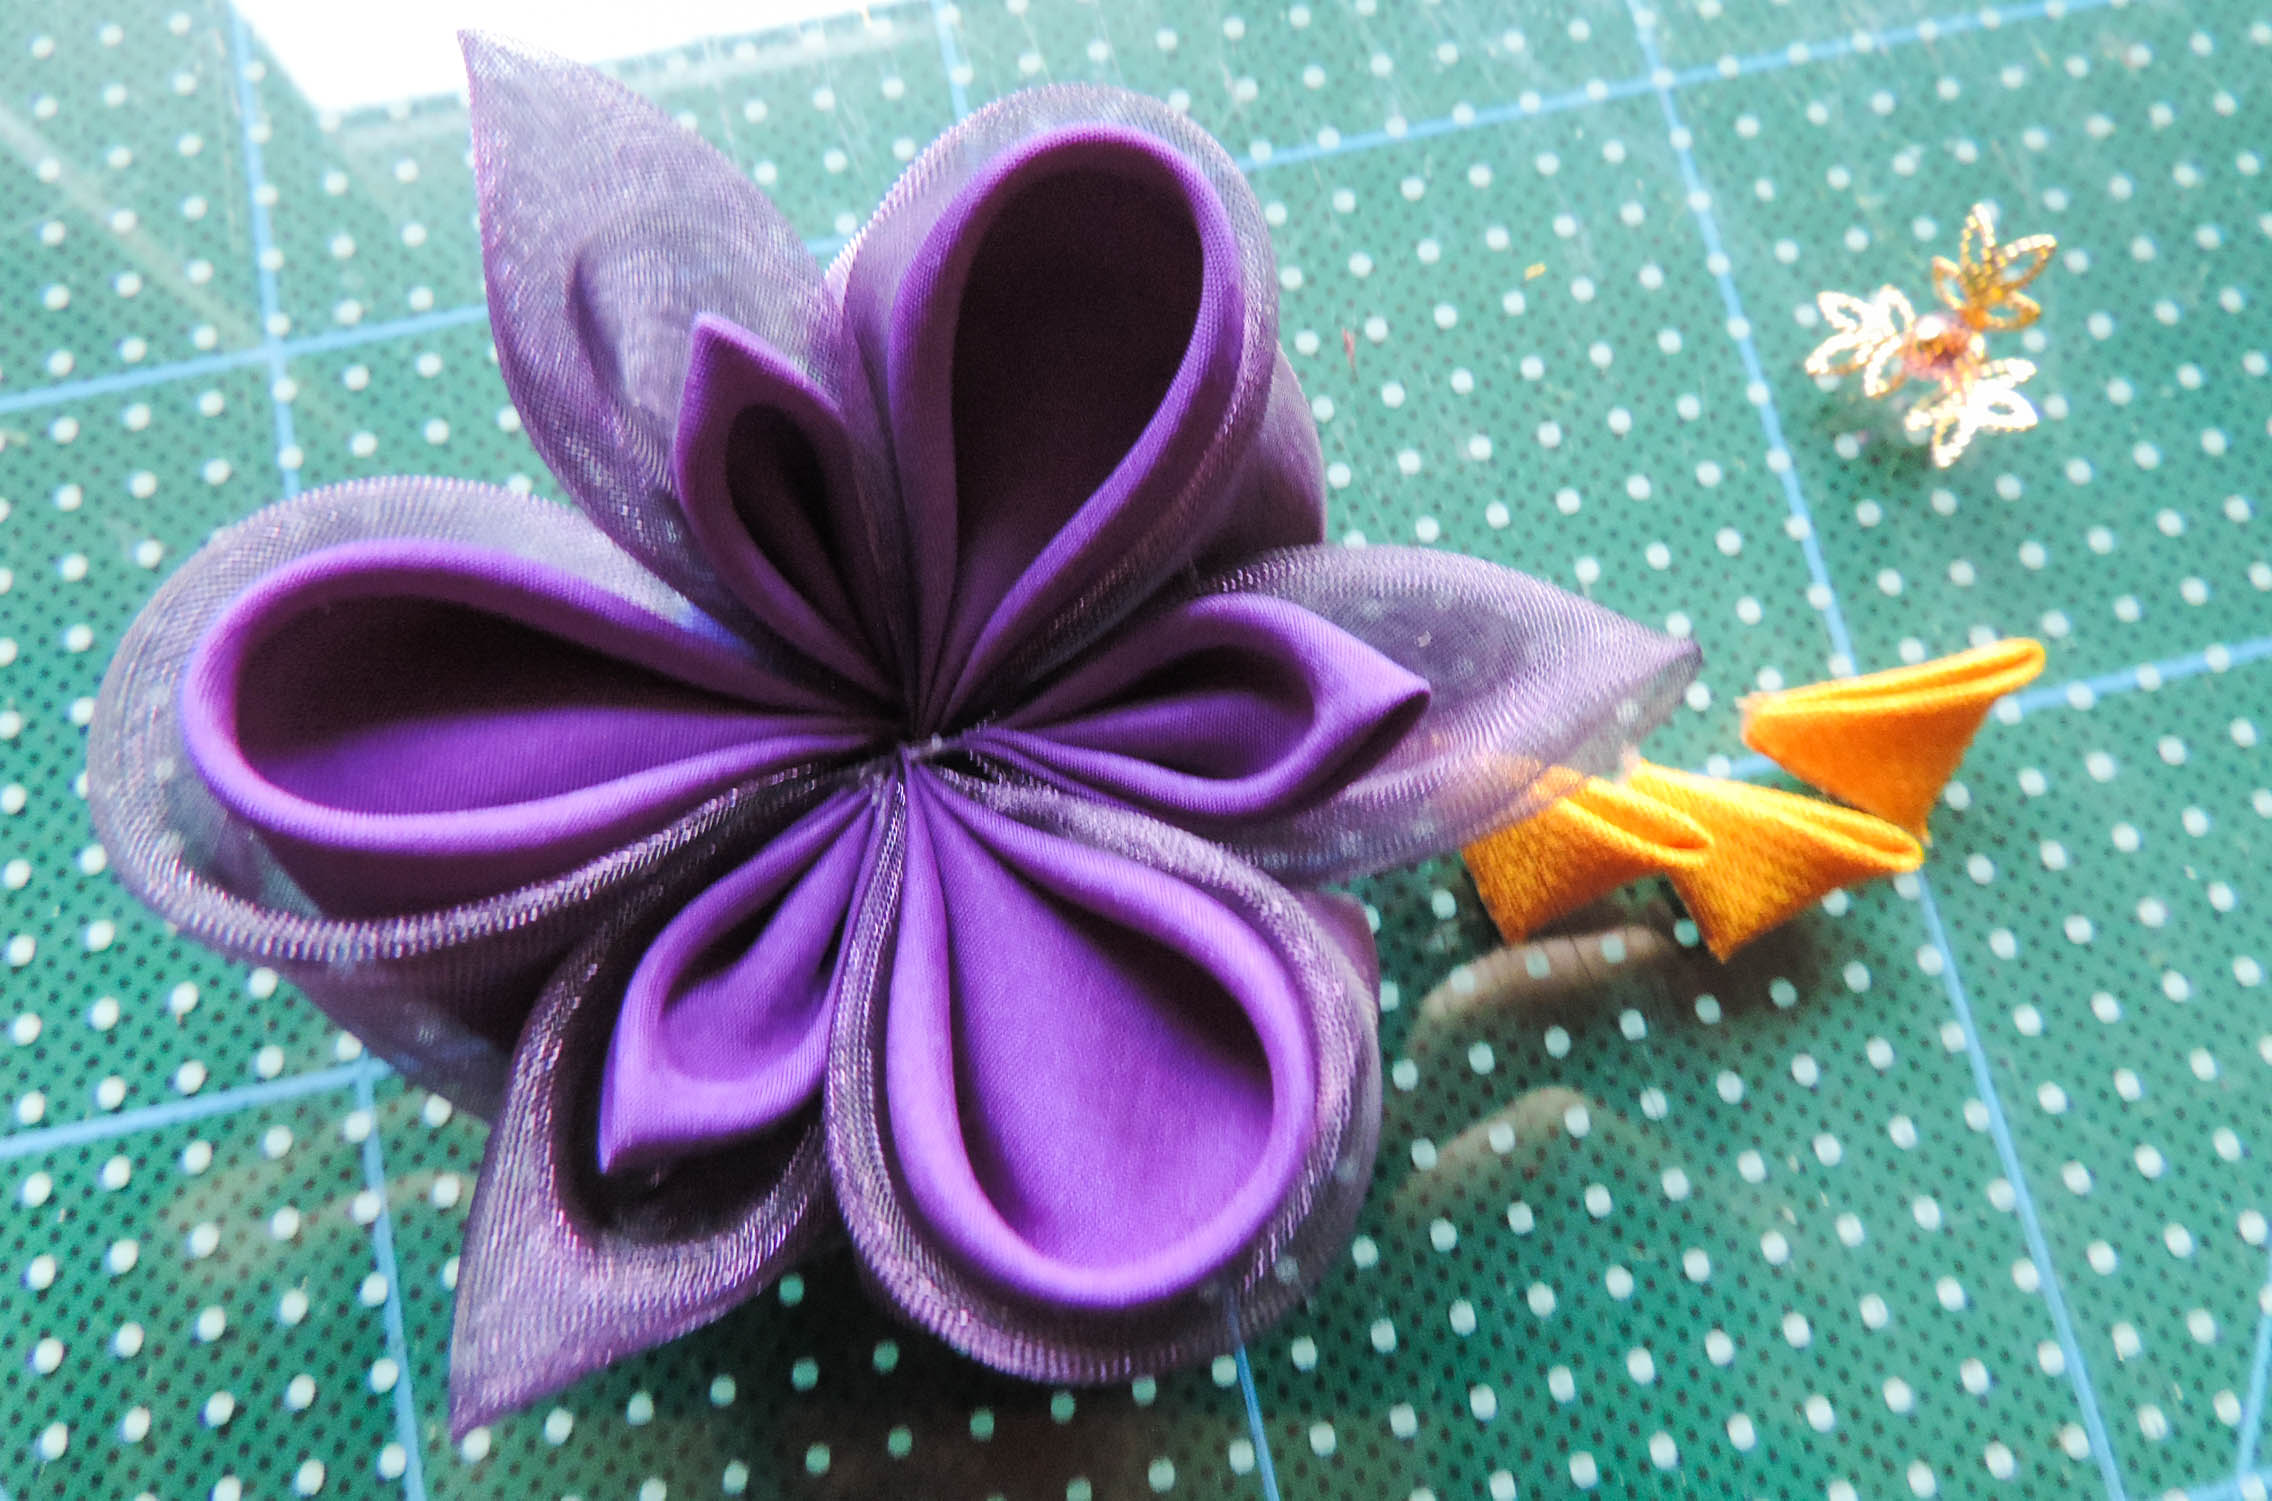 Iris flower tutorial - attaching the petals to the base 3